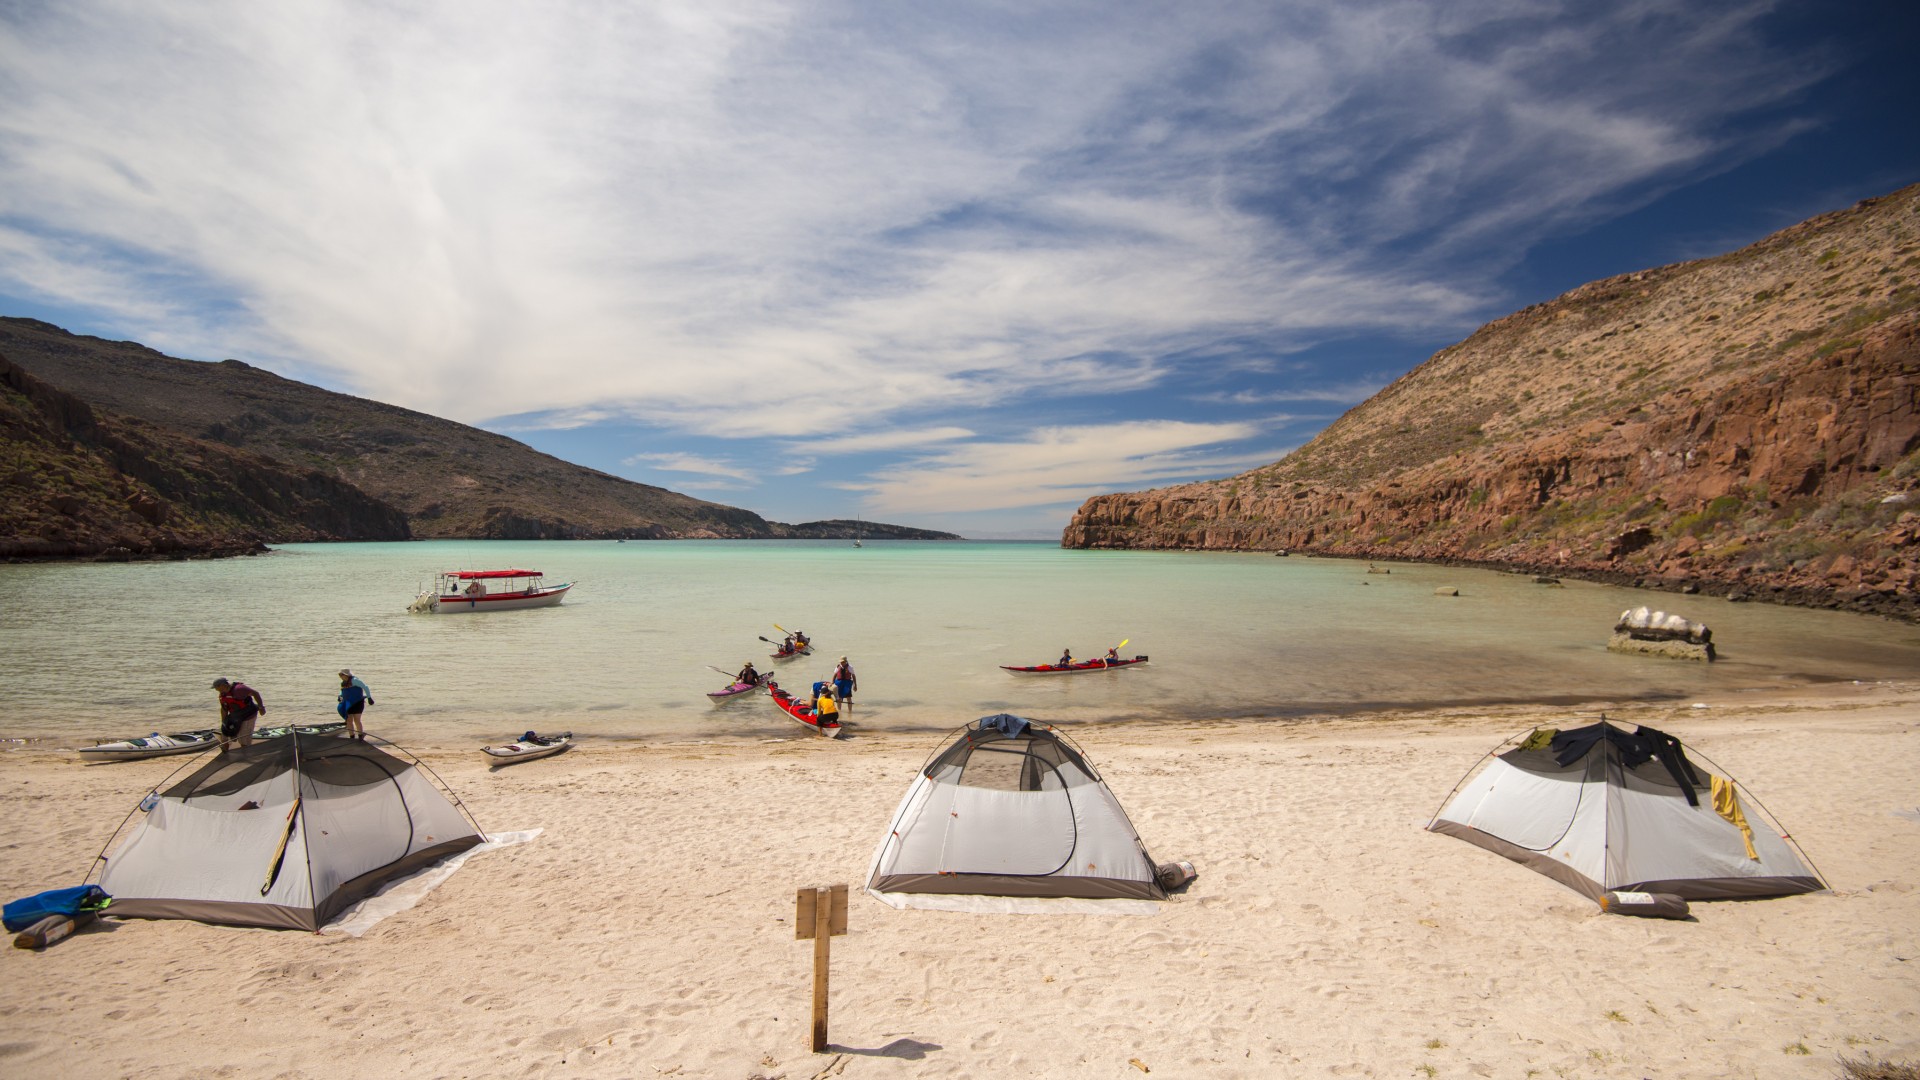 Beach camp set up on a partly cloudy day on a island off the coast of La Paz along the Gulf of California